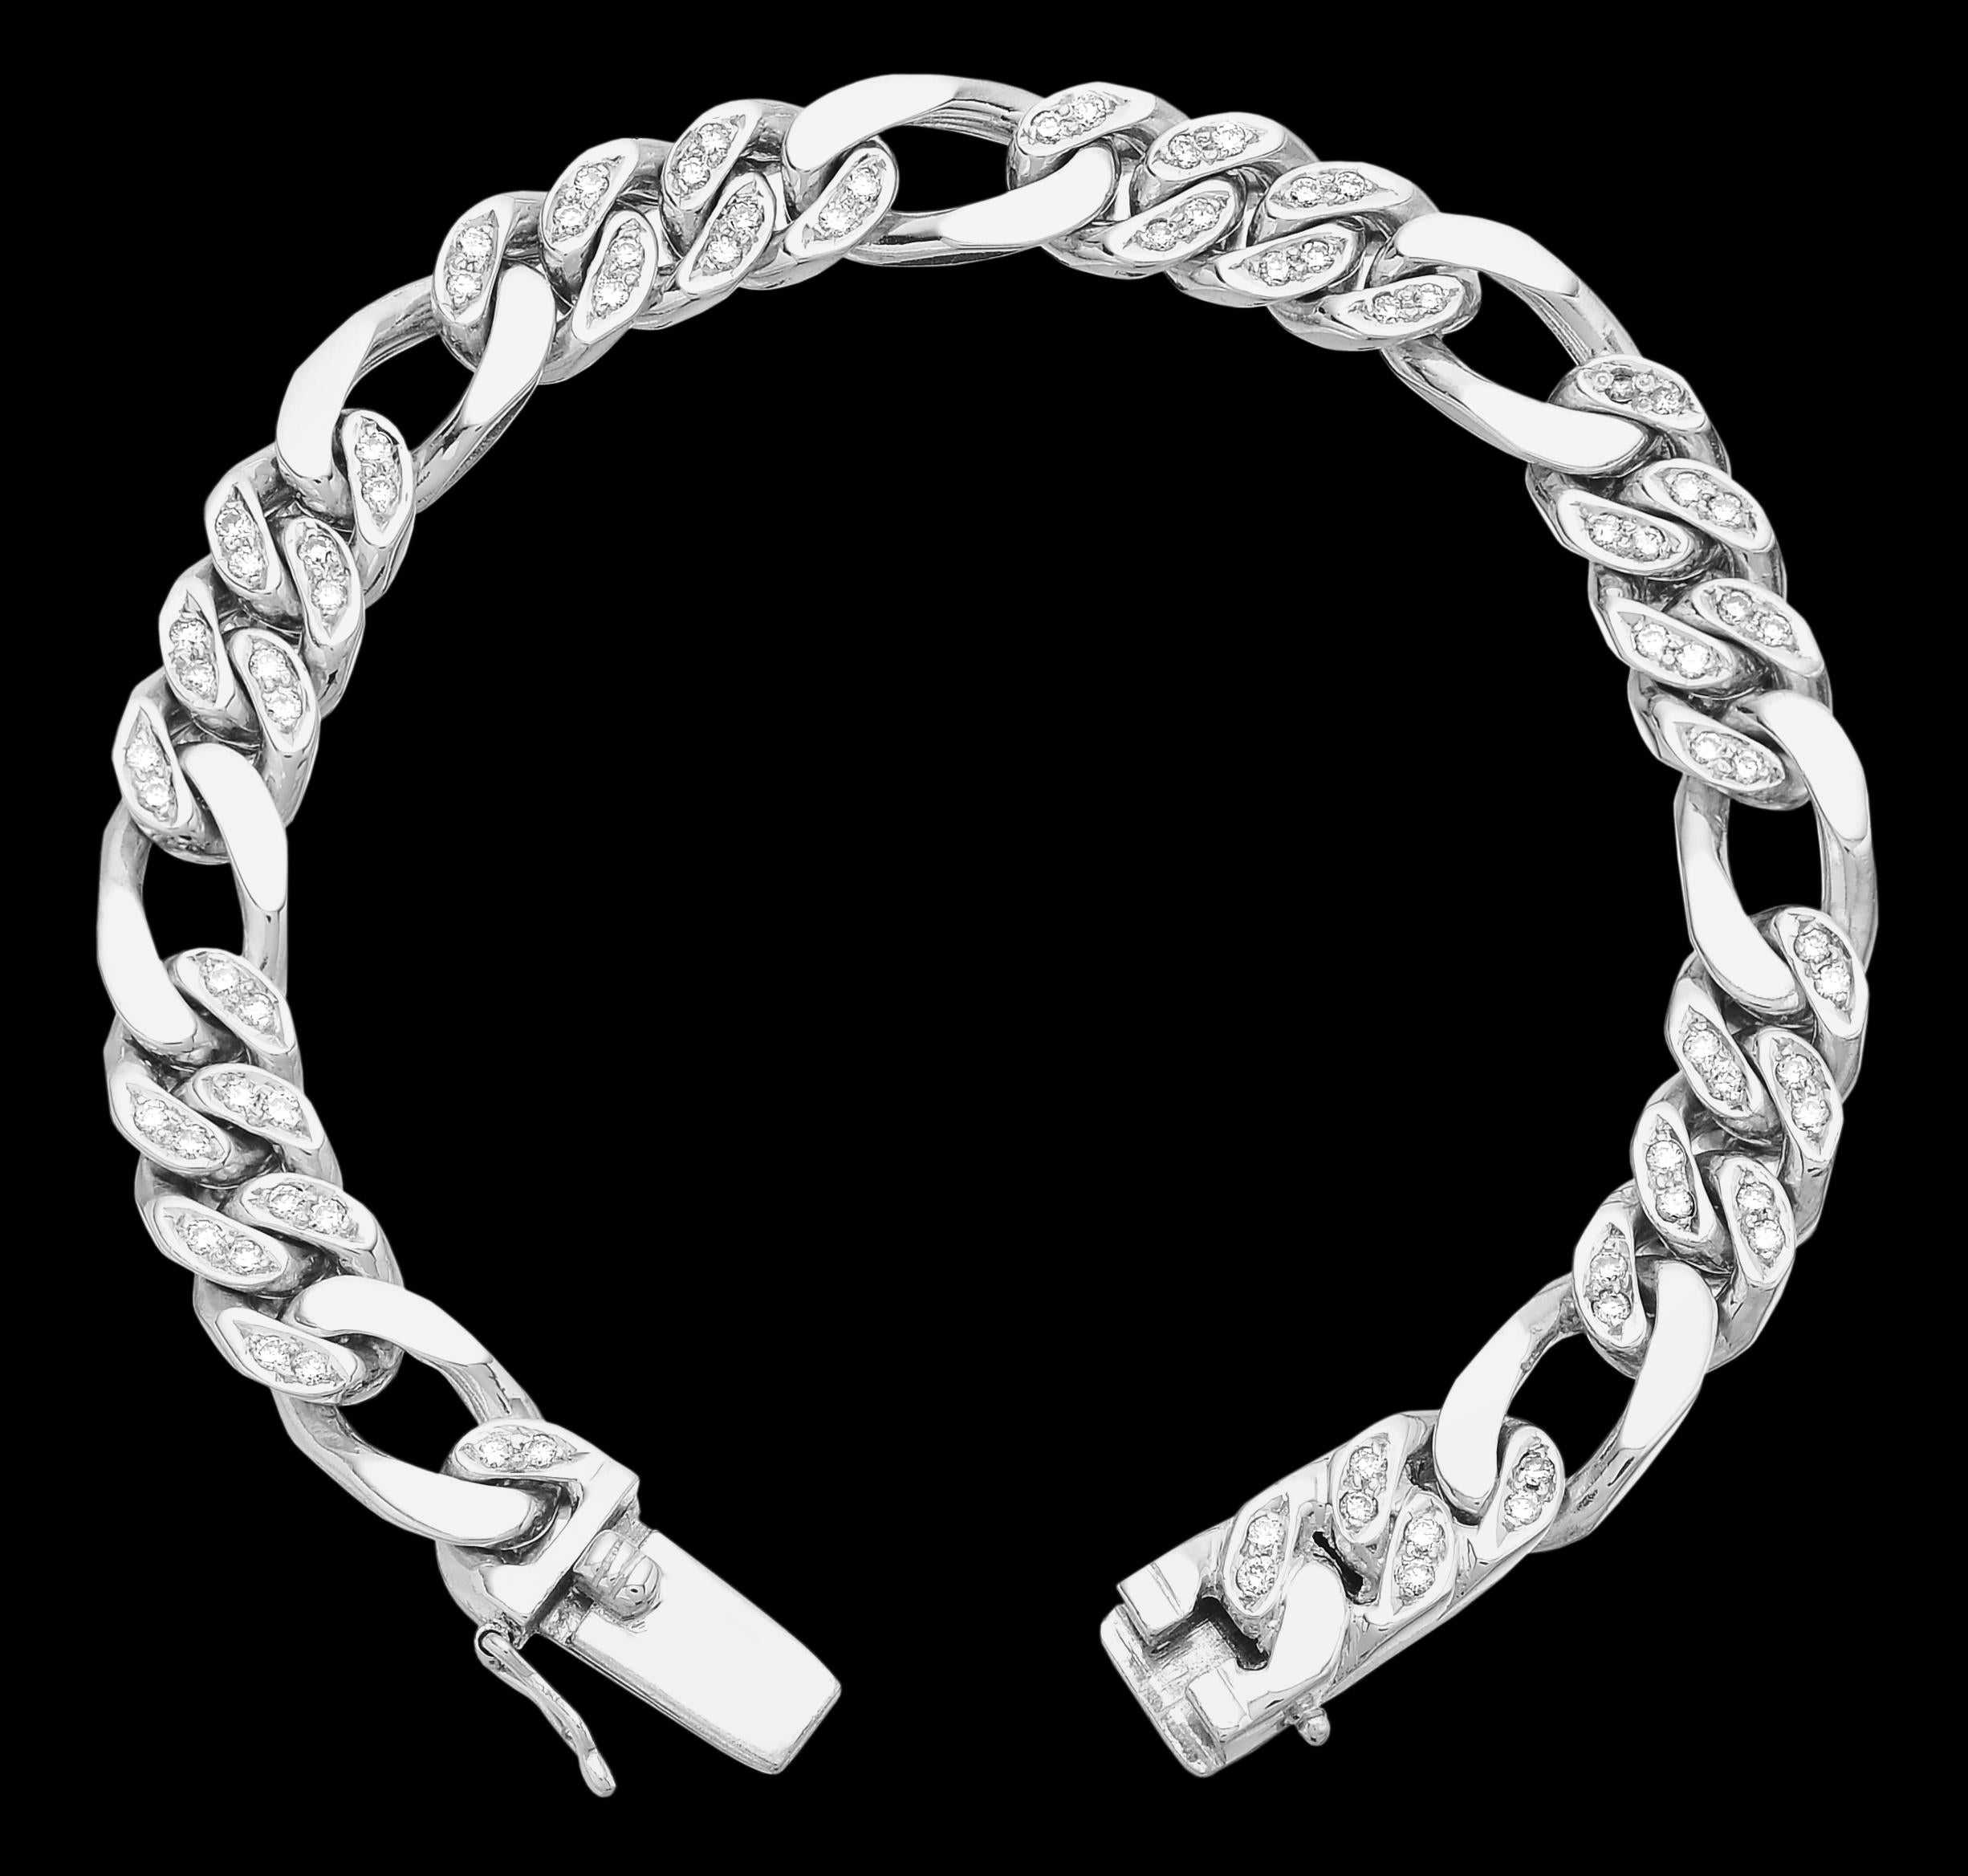 Diamond set Figaro Curb Link Chain Bracelet in Heavy Solid 14 ct White Gold

Resembling infinite unbreakable bonds, this diamond set chain bracelet shows strong personality. The links are immacutely crafted to the sleekest finish.  The links